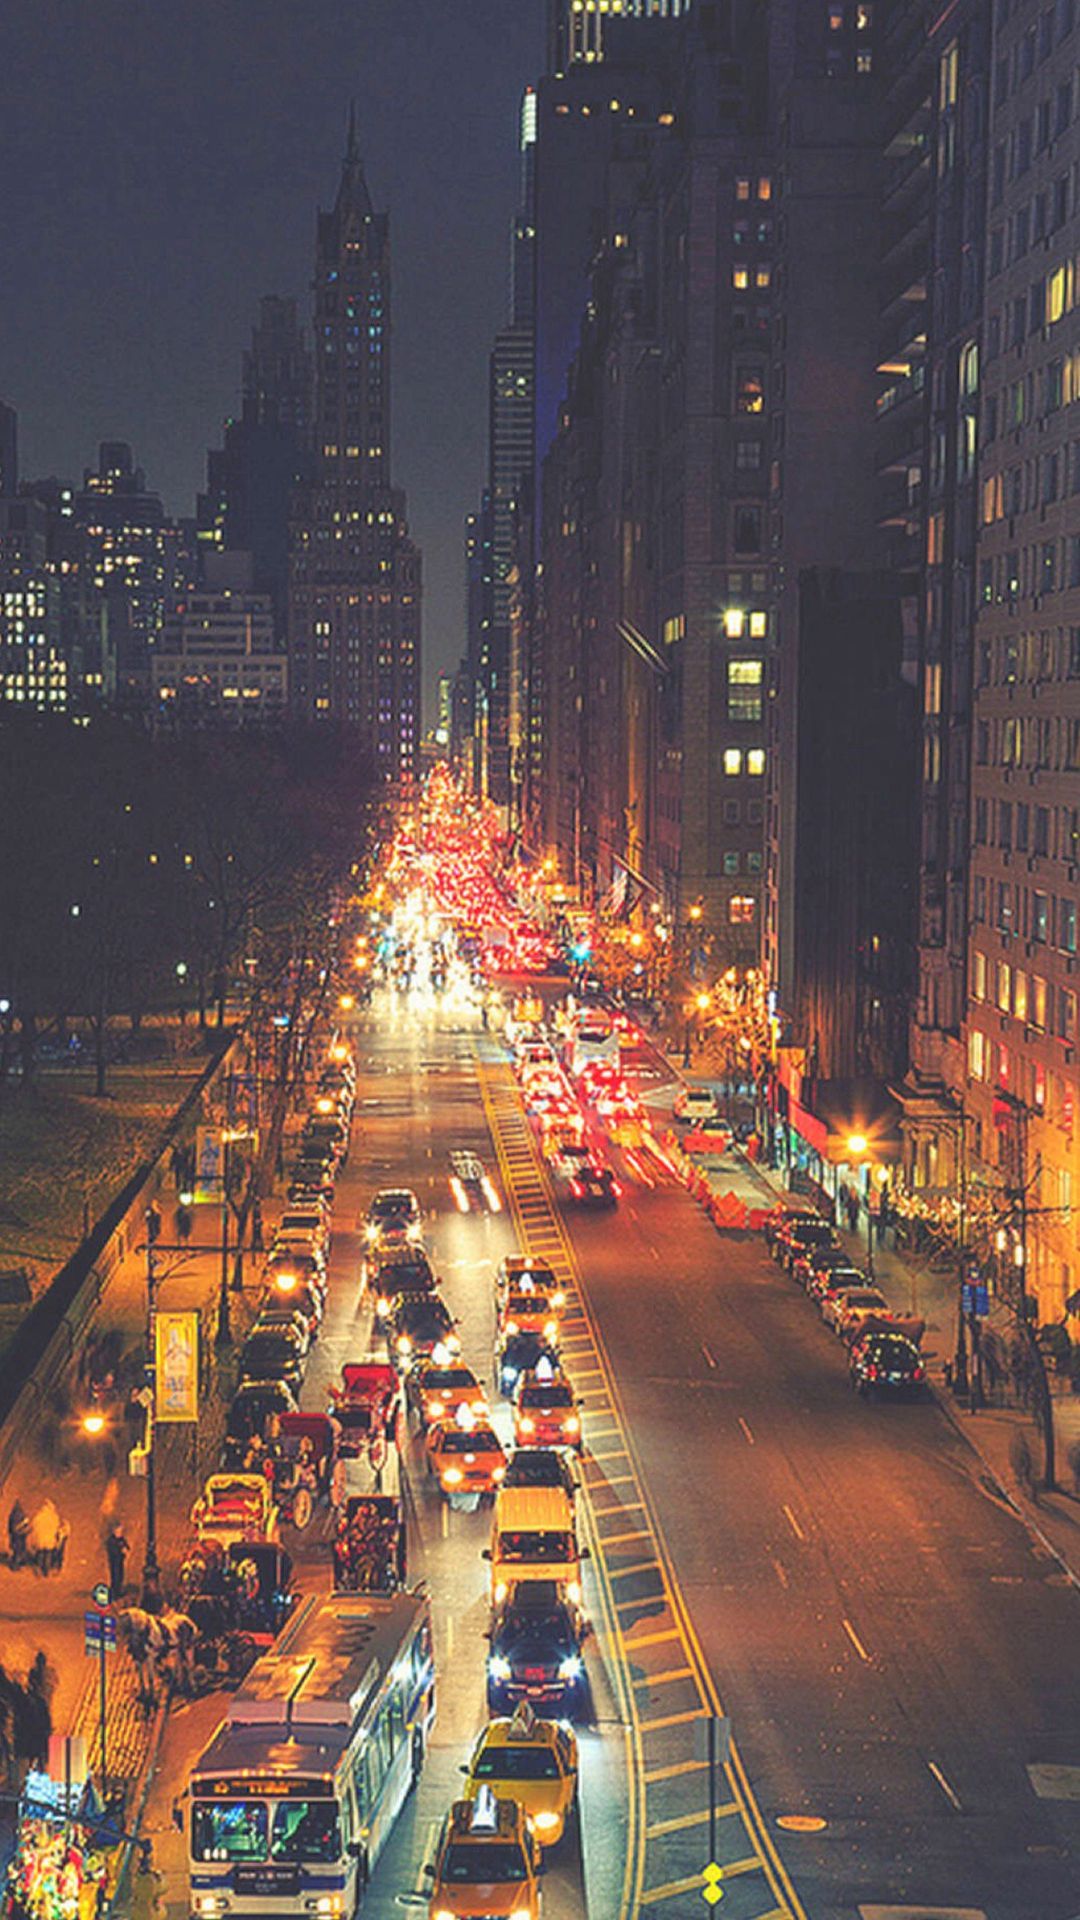 Busy New York Street Night Traffic IPhone 6 Wallpaper Download. IPhone Wallpaper, IPad Wallpaper One Stop Download. Night Life, City, Beautiful Places